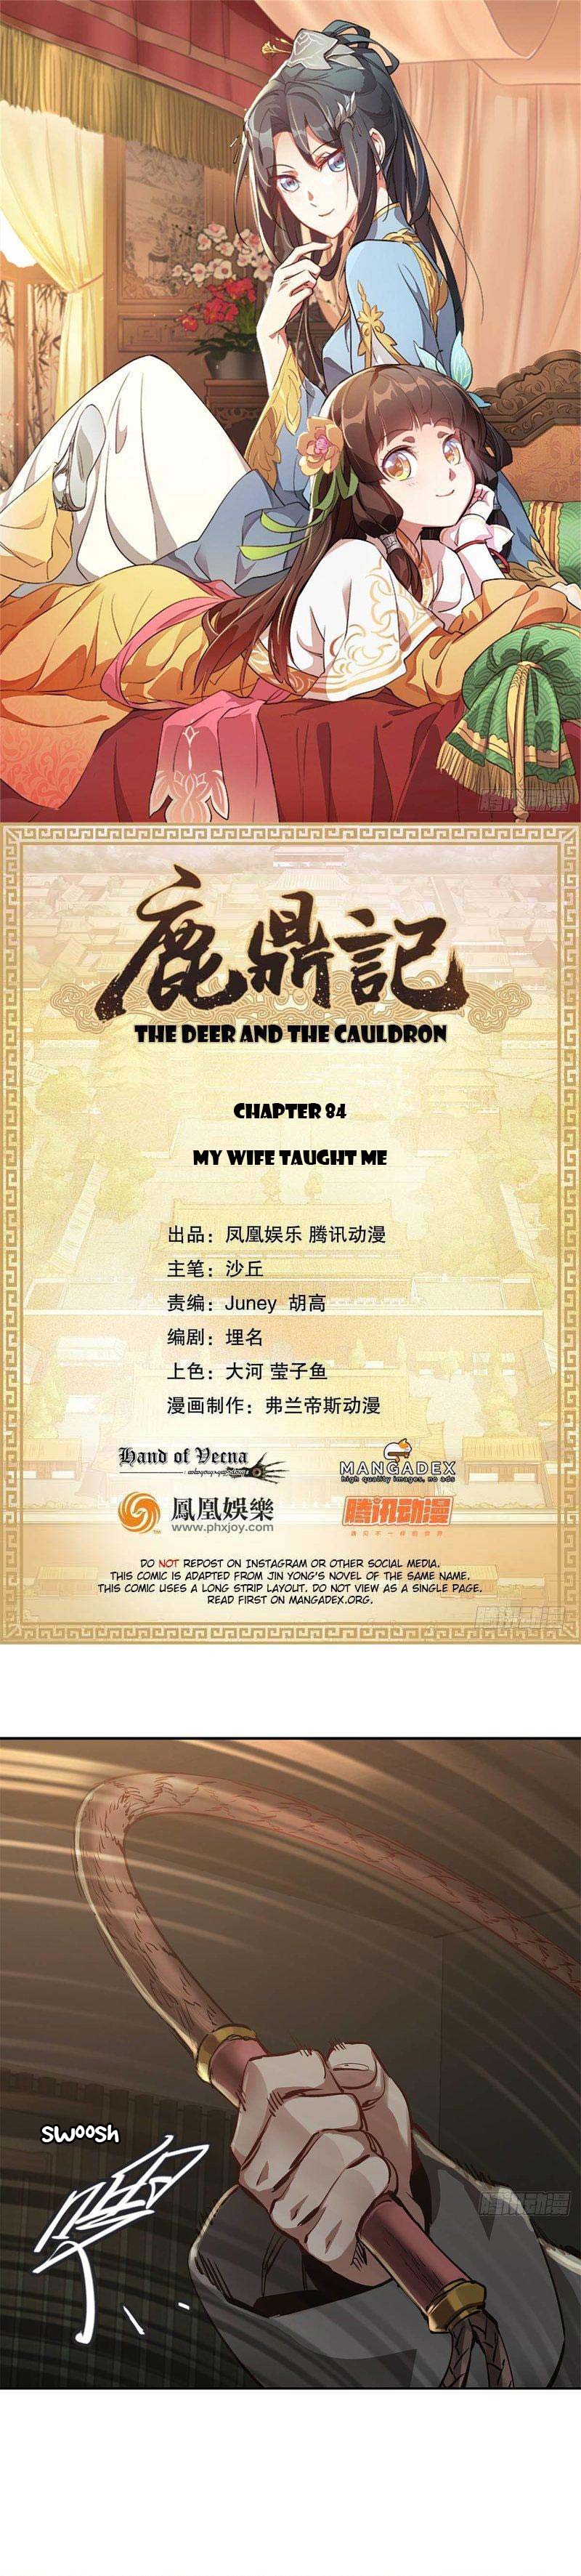 The Deer and the Cauldron Ch. 84 My Wife Taught Me